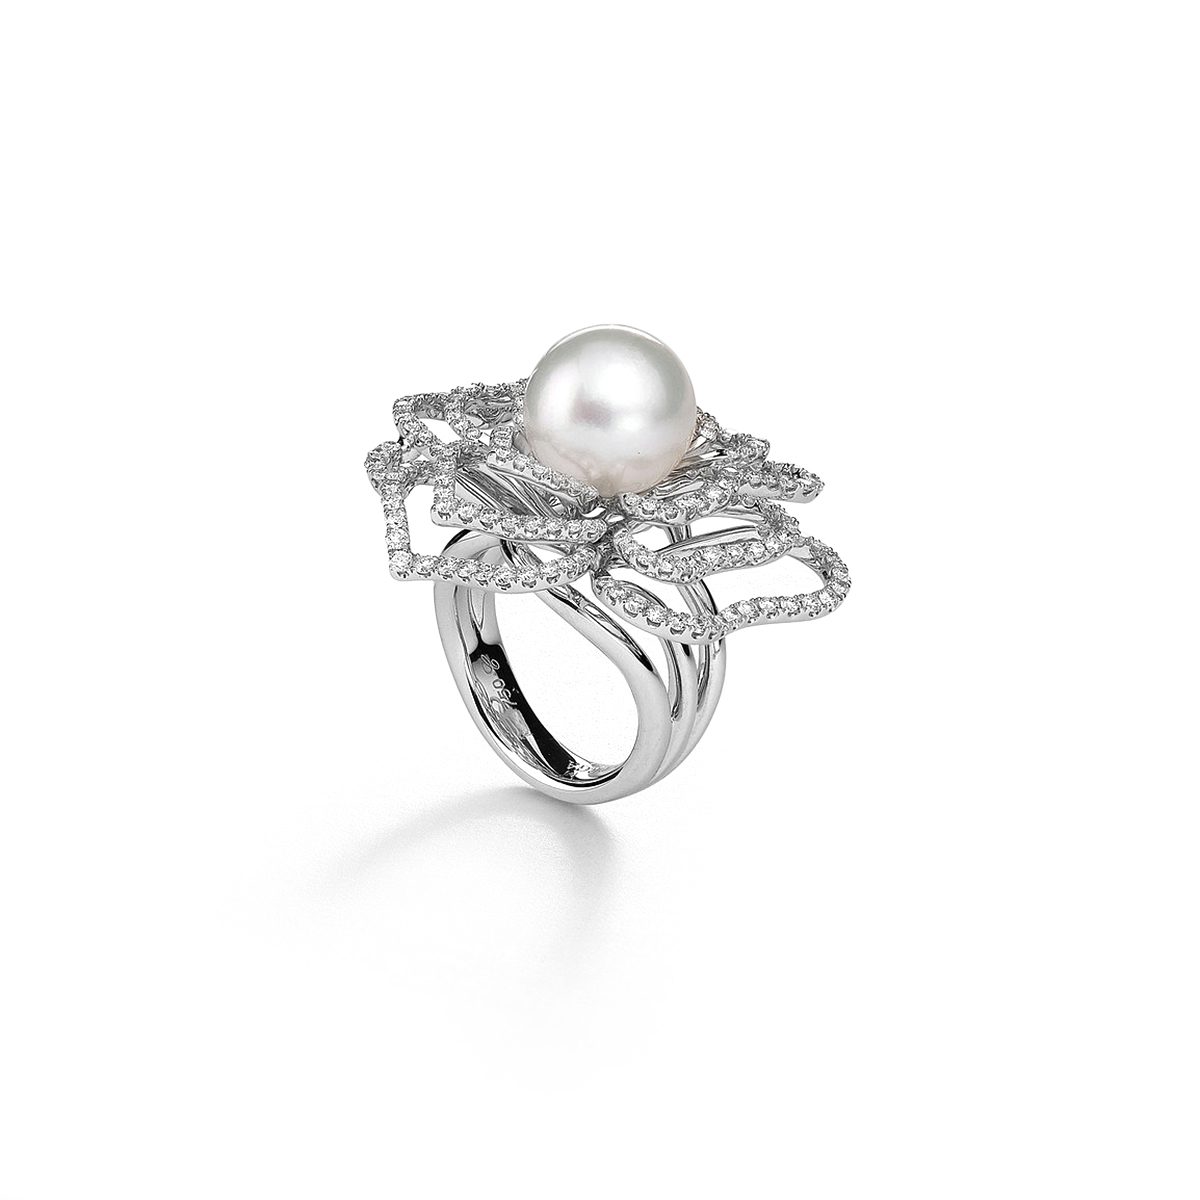 jewels-diamonds-south-sea-pearl-18kt-gold-ring